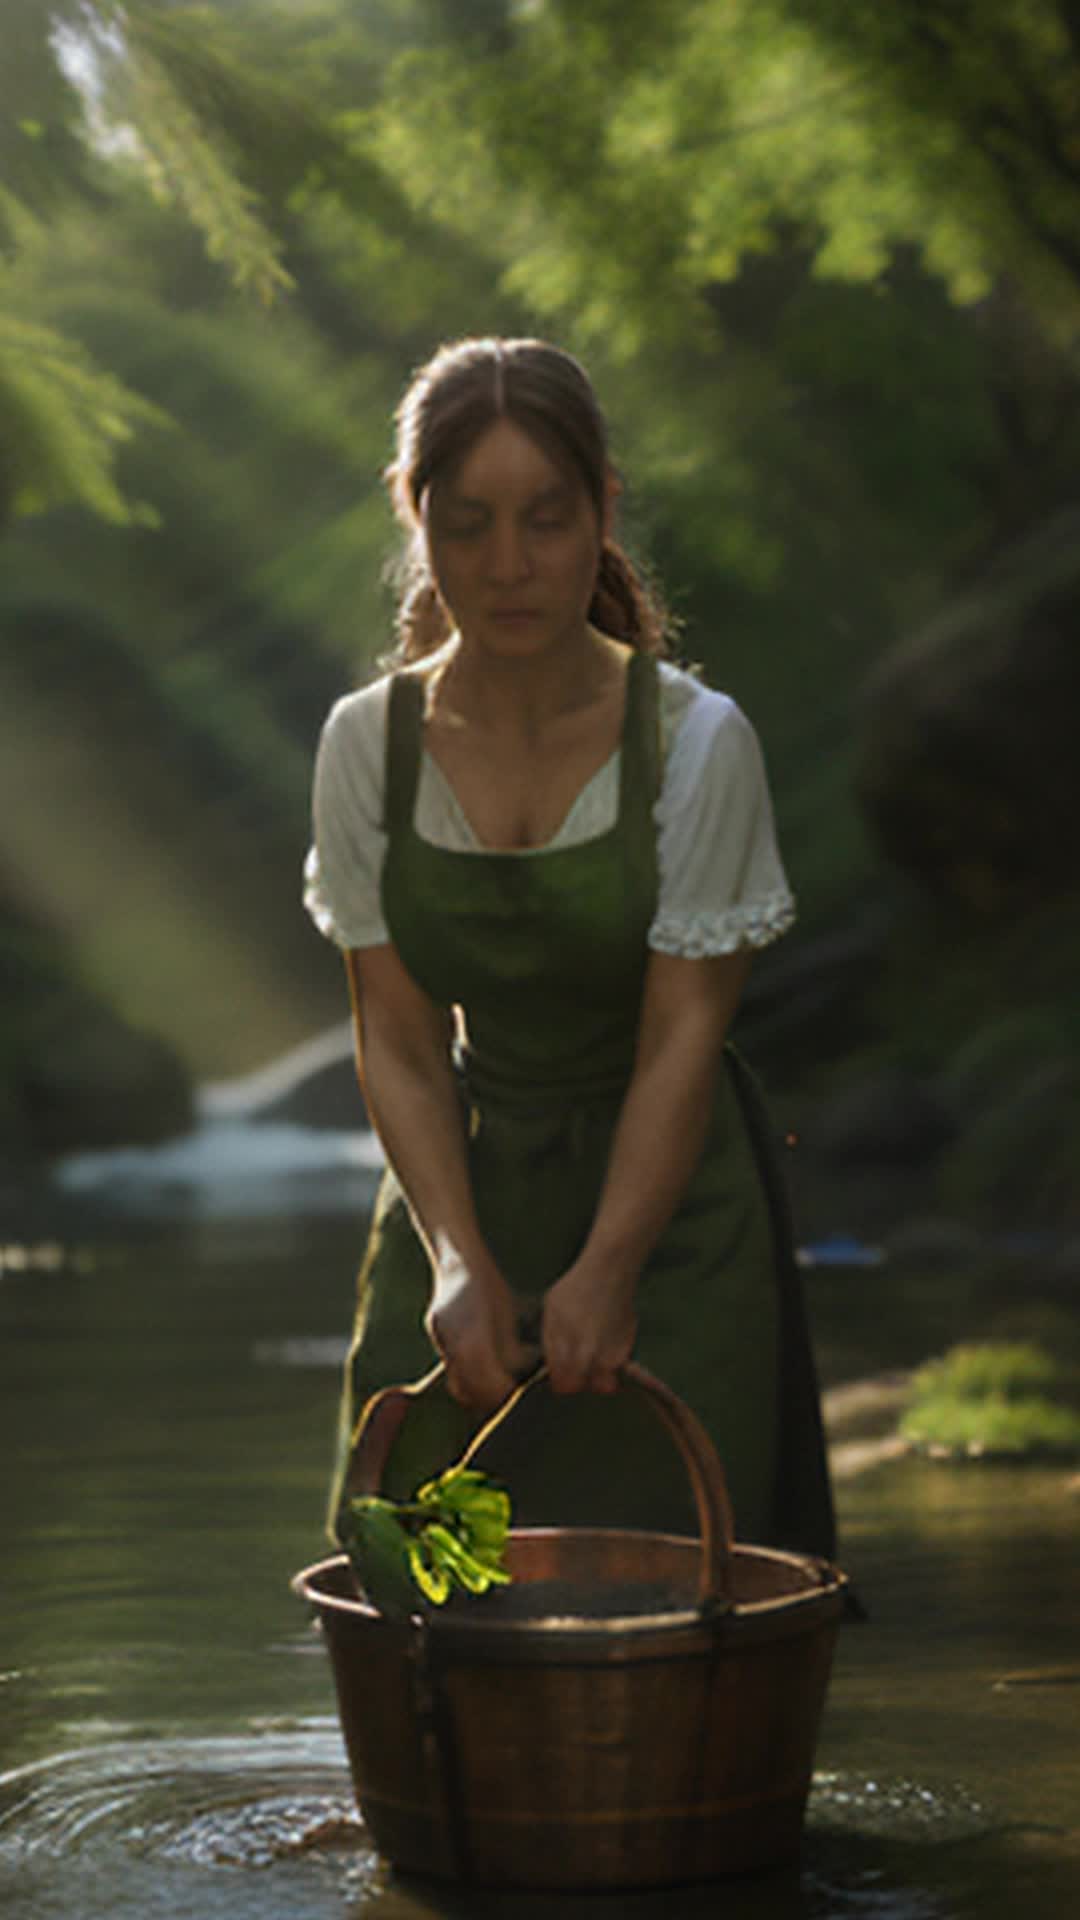 maiden fetching water from creek, 1600s attire, worn apron, rustic countryside, clear flowing creek, wooden bucket, lush green surroundings, mosscovered rocks, tall old trees, soft shadows, detailed and sharp focus, sun beams breaking through canopy, peaceful and historical ambiance, slow graceful movements, low angle shot, soft warm lighting, natural tones, serene environment, rendered by octane